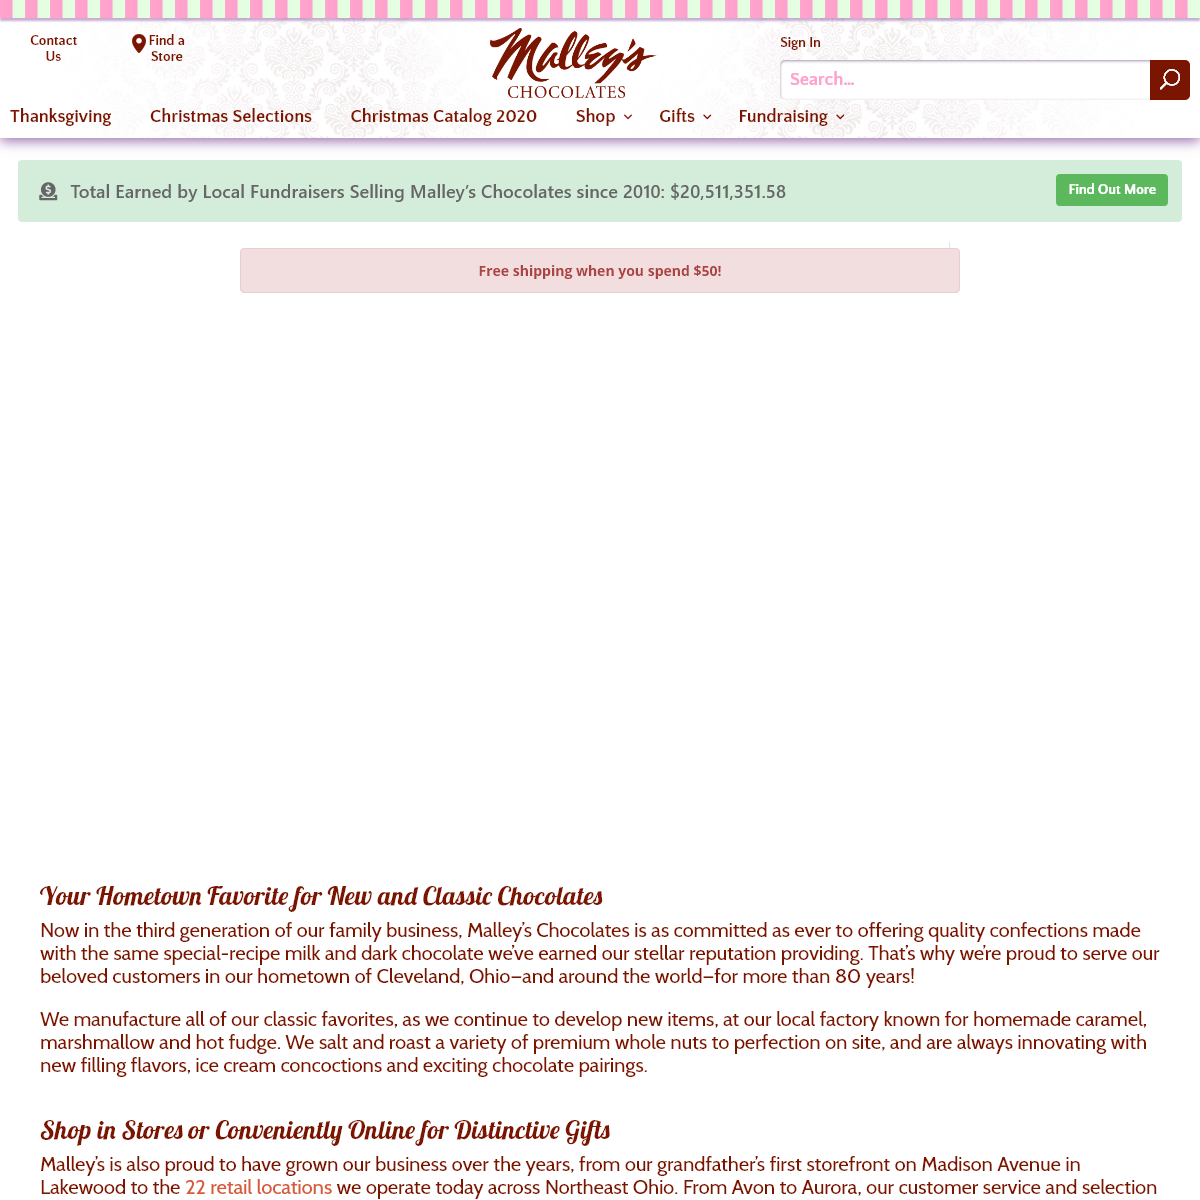 A complete backup of malleys.com